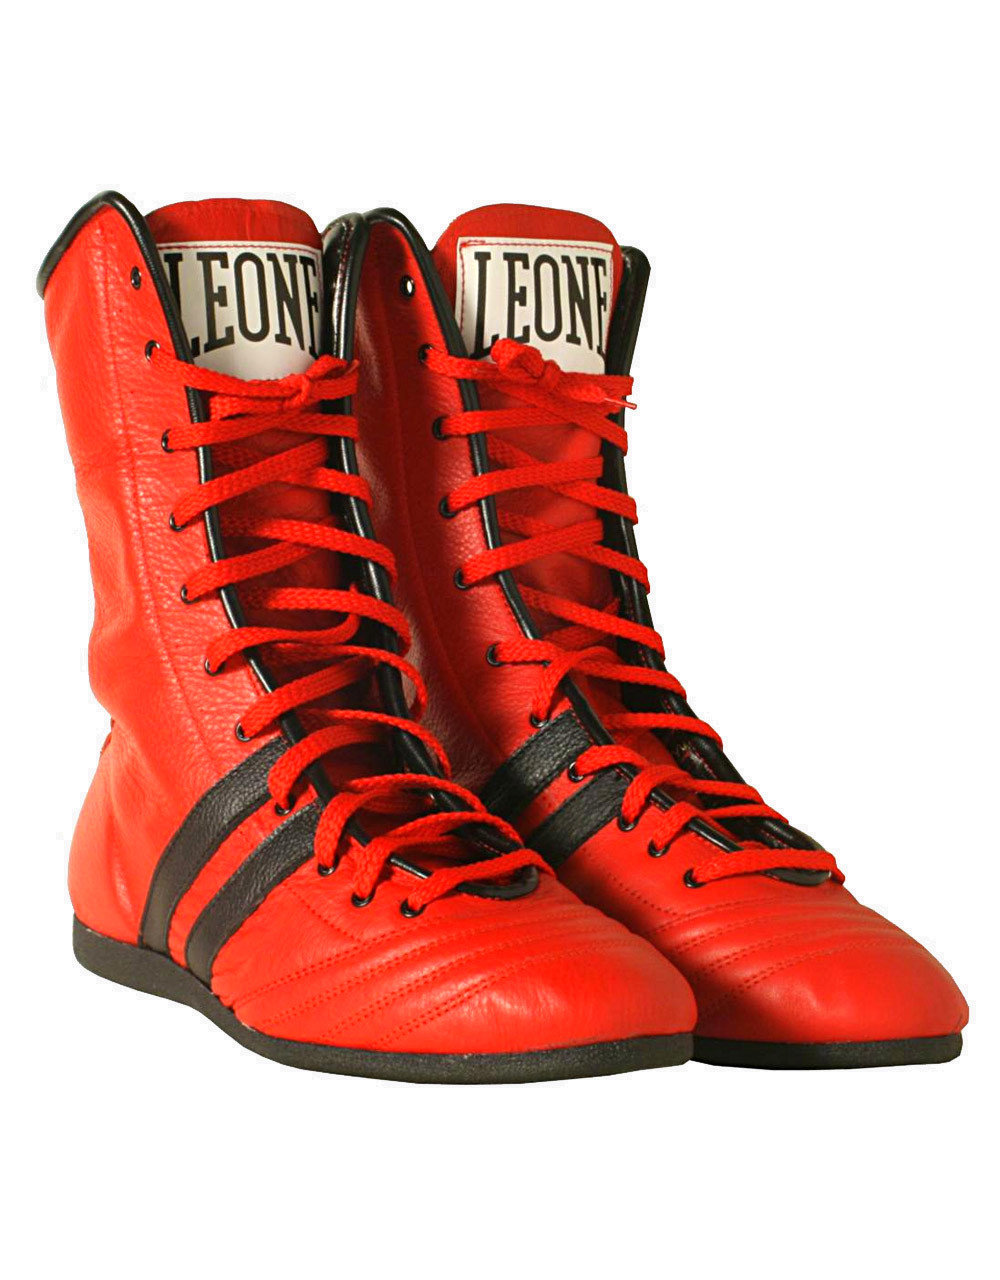 Boxing Shoes by LEONE (colour: red)